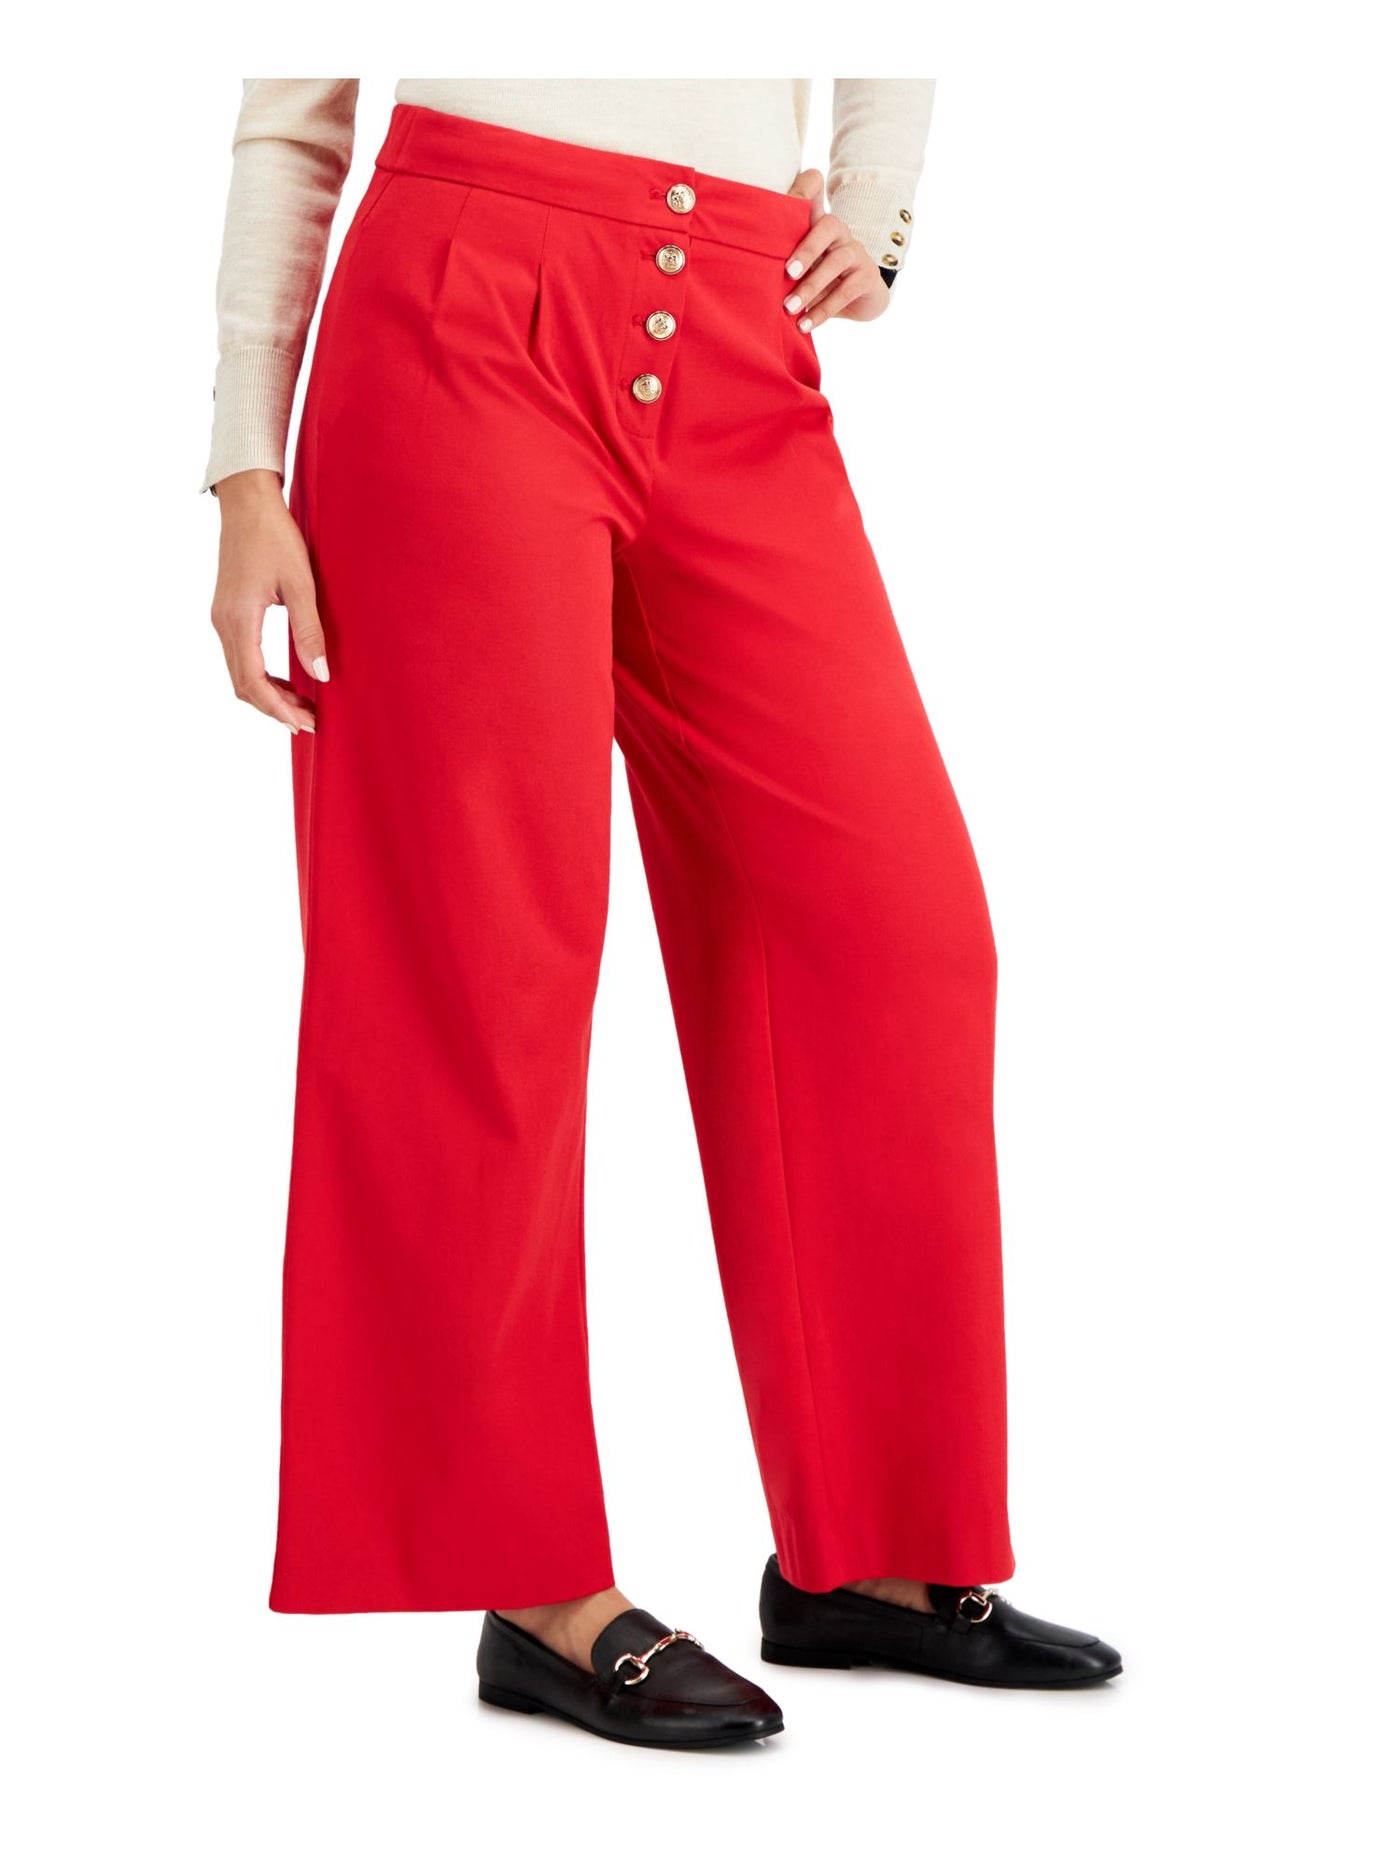 CHARTER CLUB Womens Red Stretch Pleated Pocketed Button Fly Wear To Work Wide Leg Pants 12